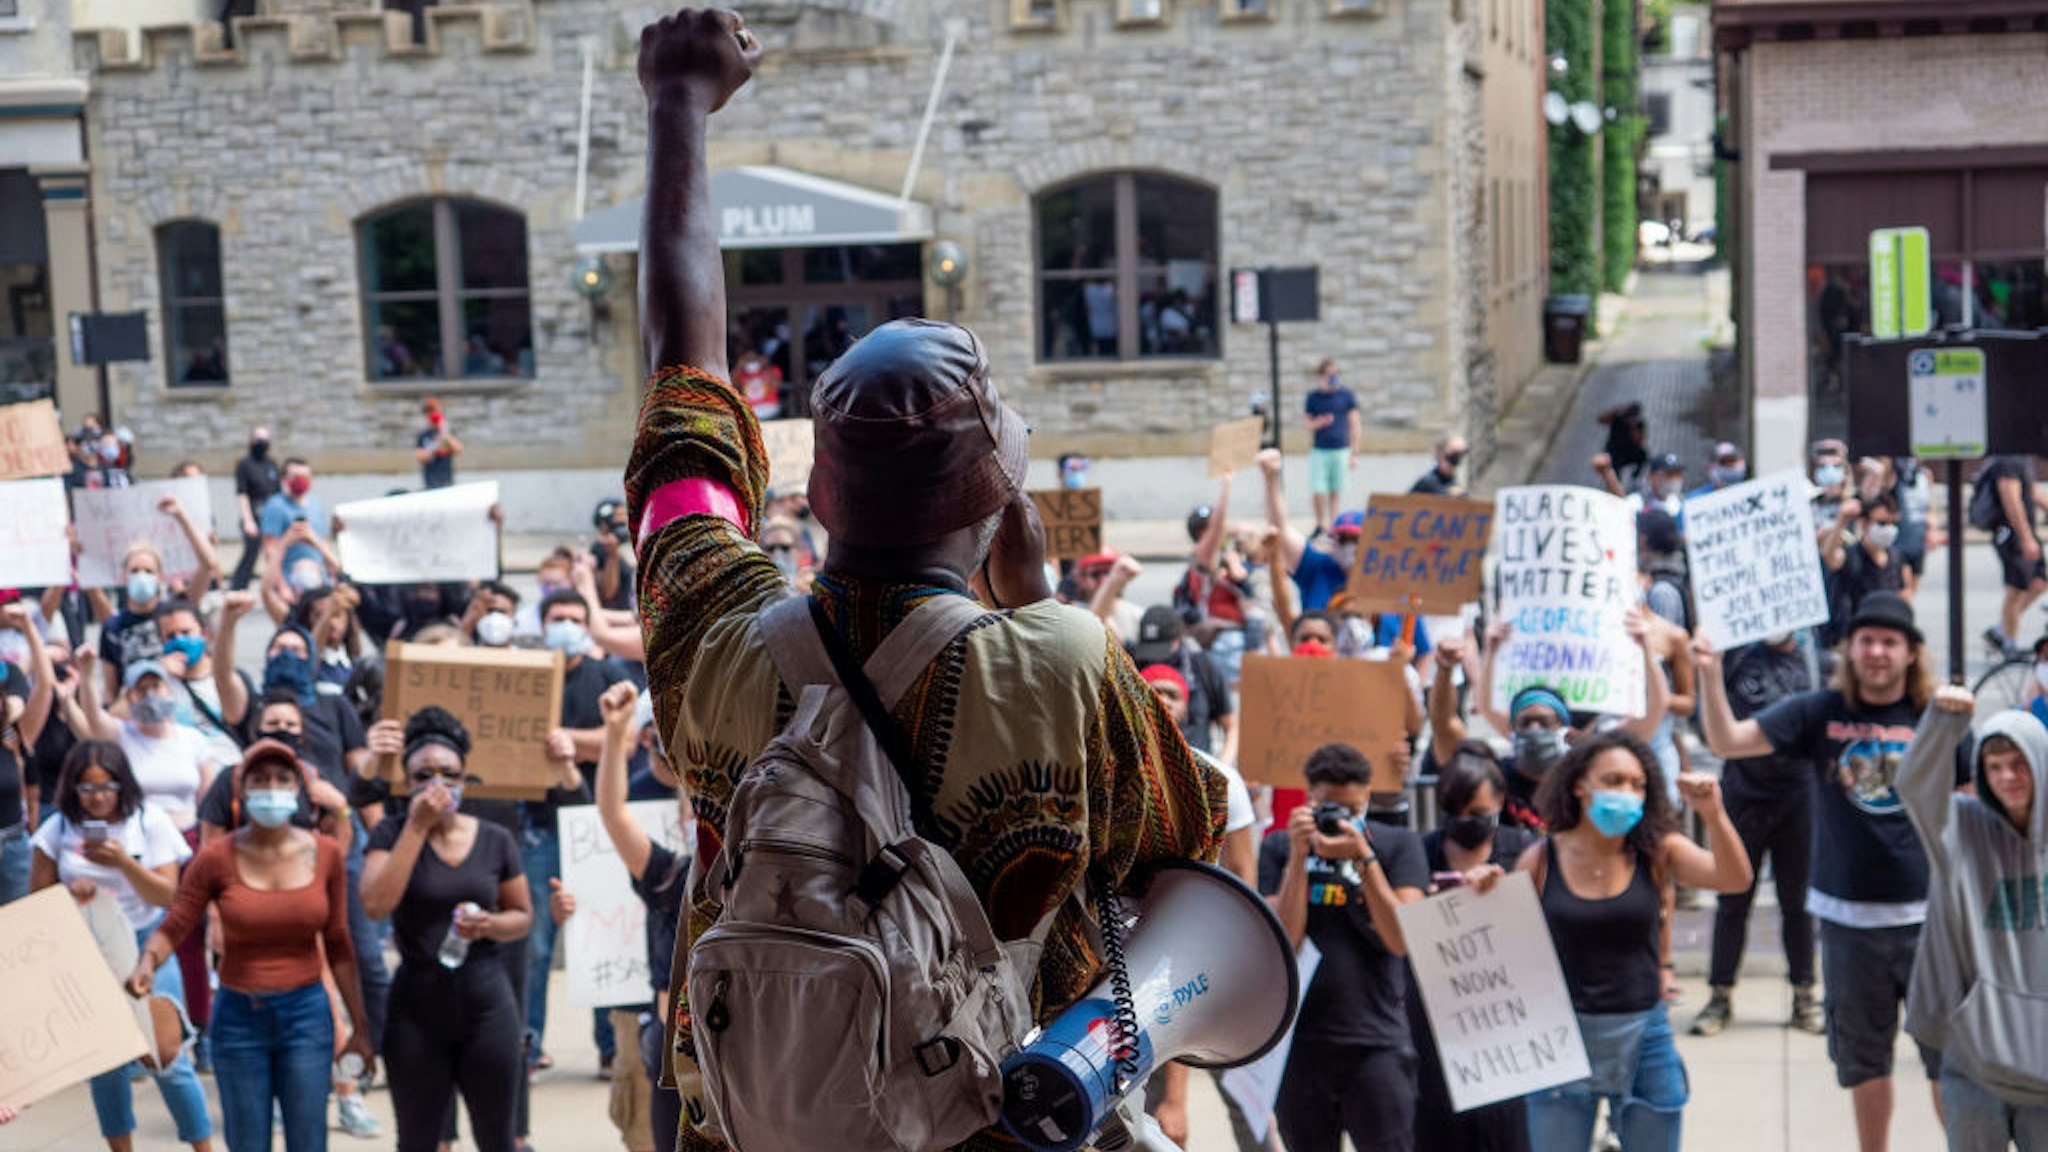 Myron Hollister Haynes (holding megaphone) speaks to protesters during a Mass Action for Black Liberation protest and march from Washington Park to City Hall following the alleged murder of George Floyd, Saturday, May 30, 2020, in Cincinnati, Ohio, United States.